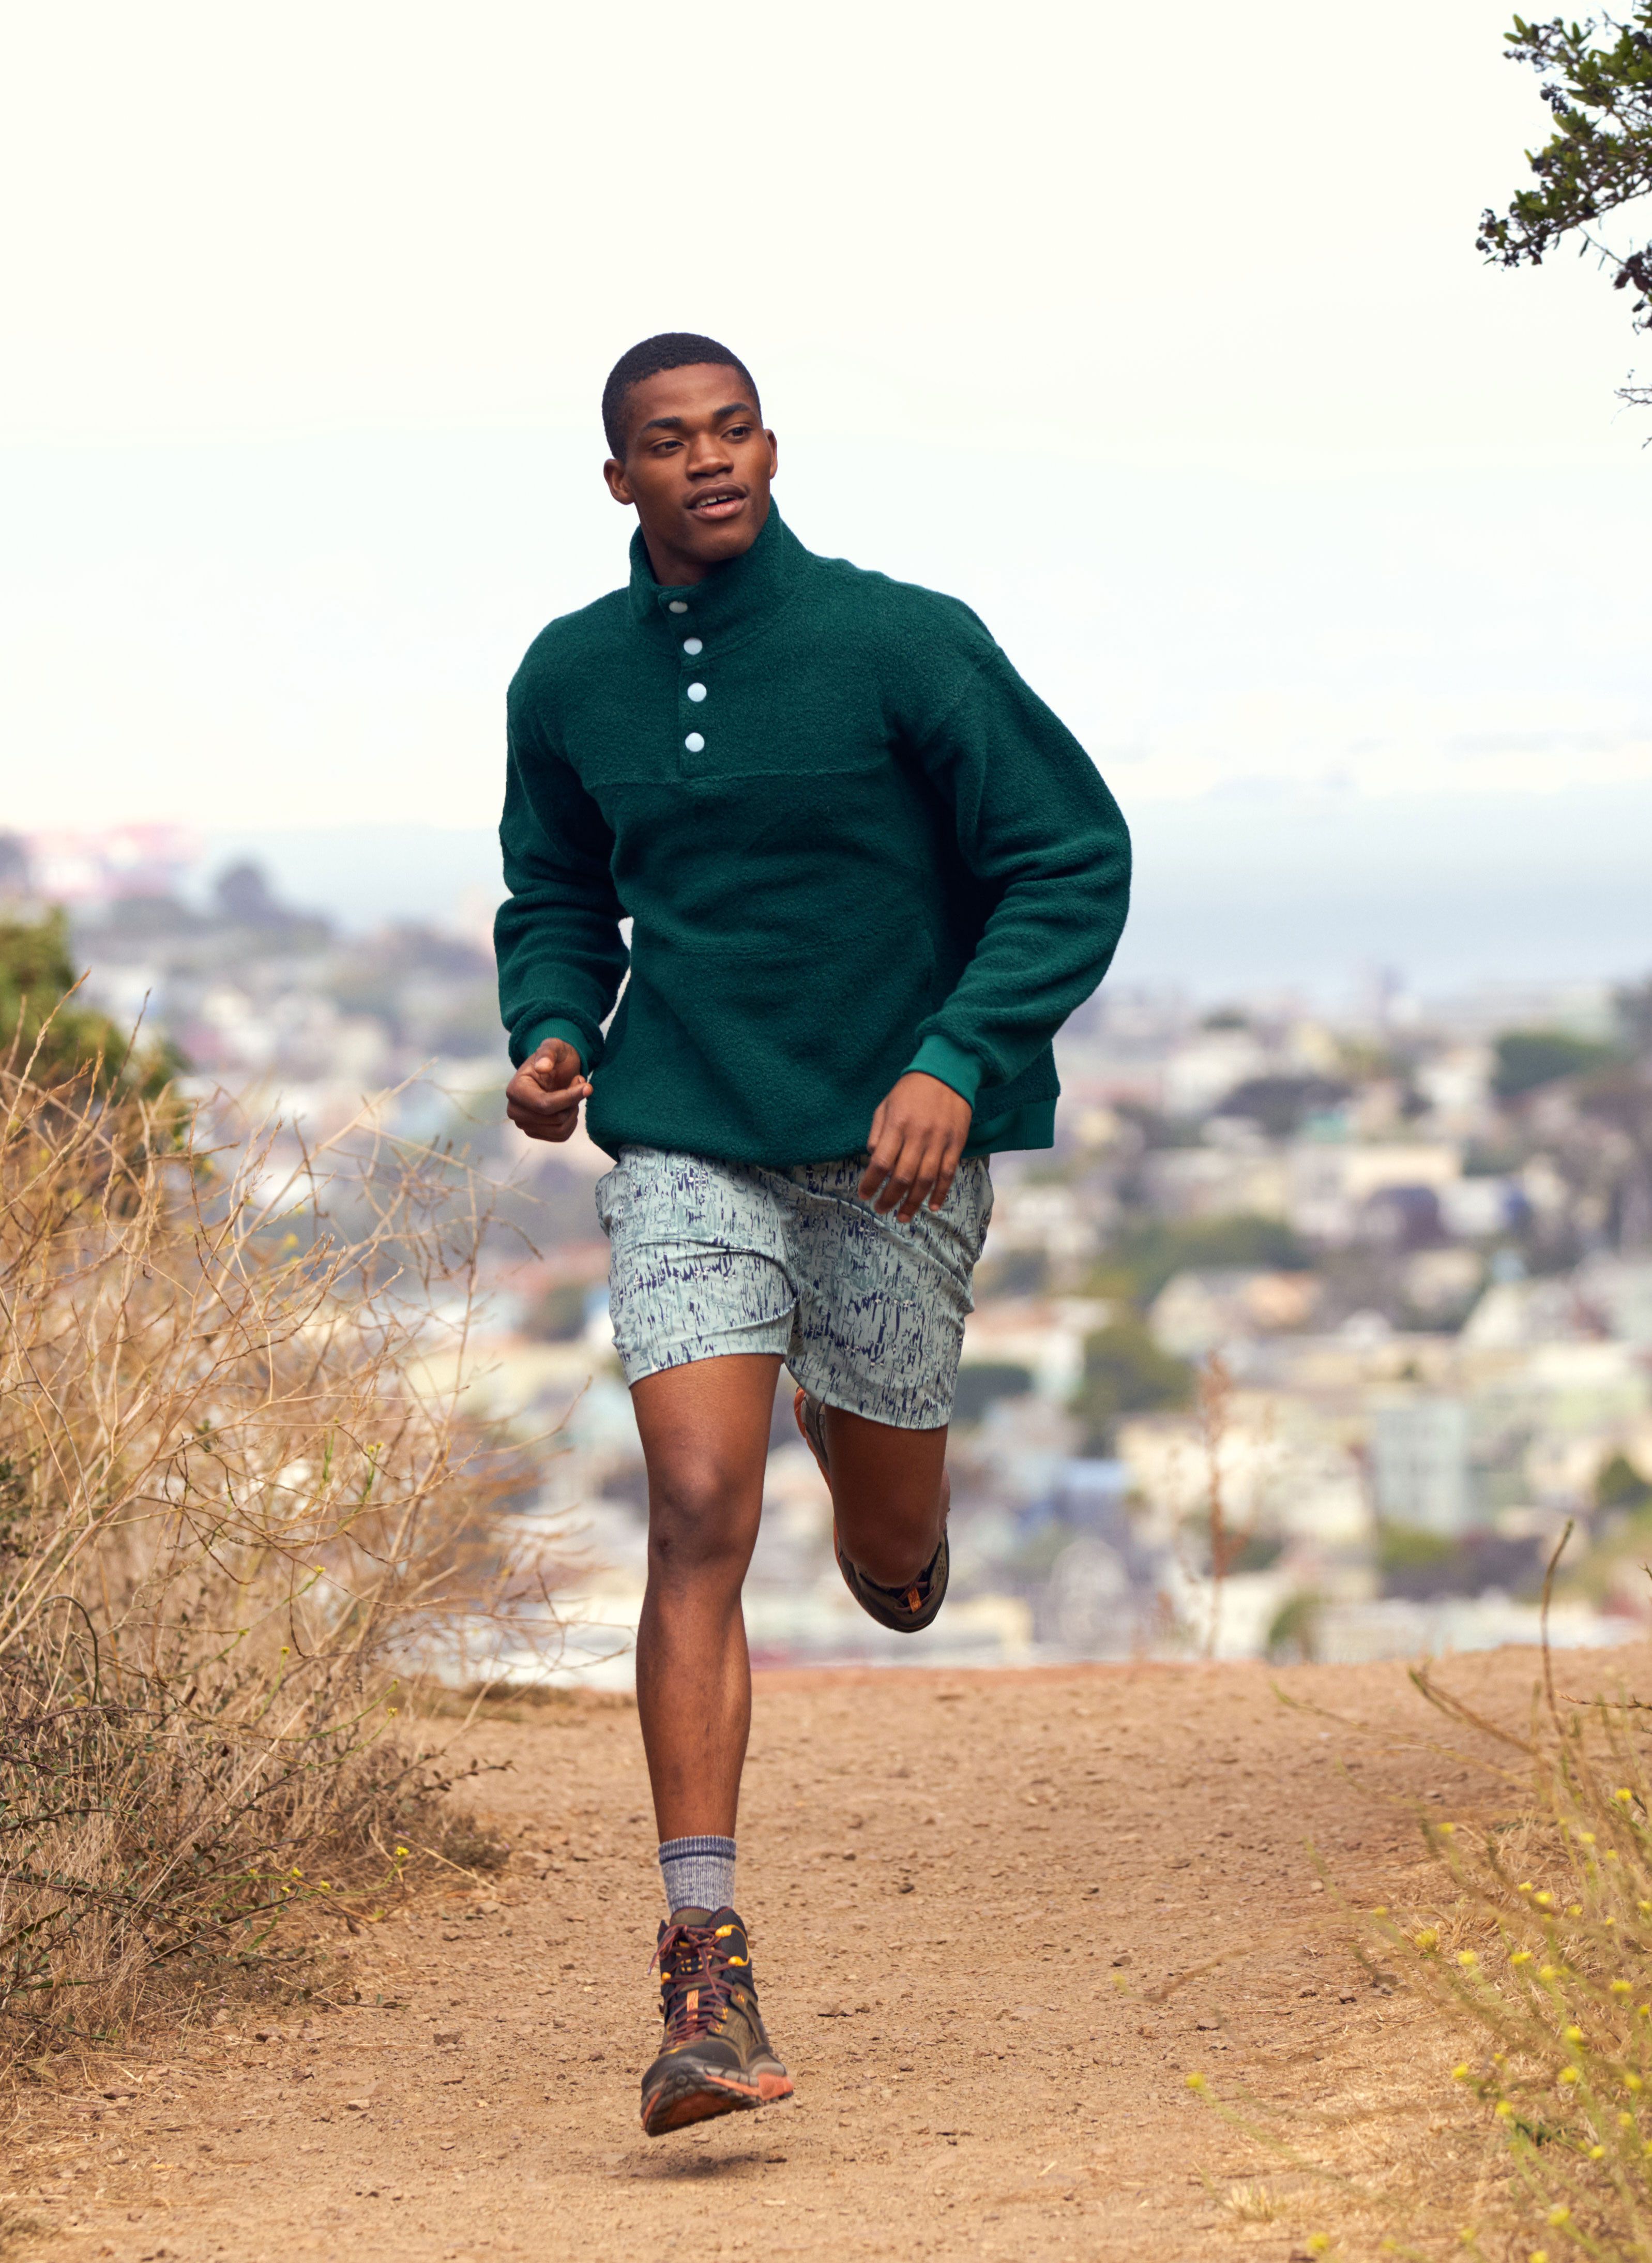 Outdoor Voices Makes Gym Clothes For Stylish Guys